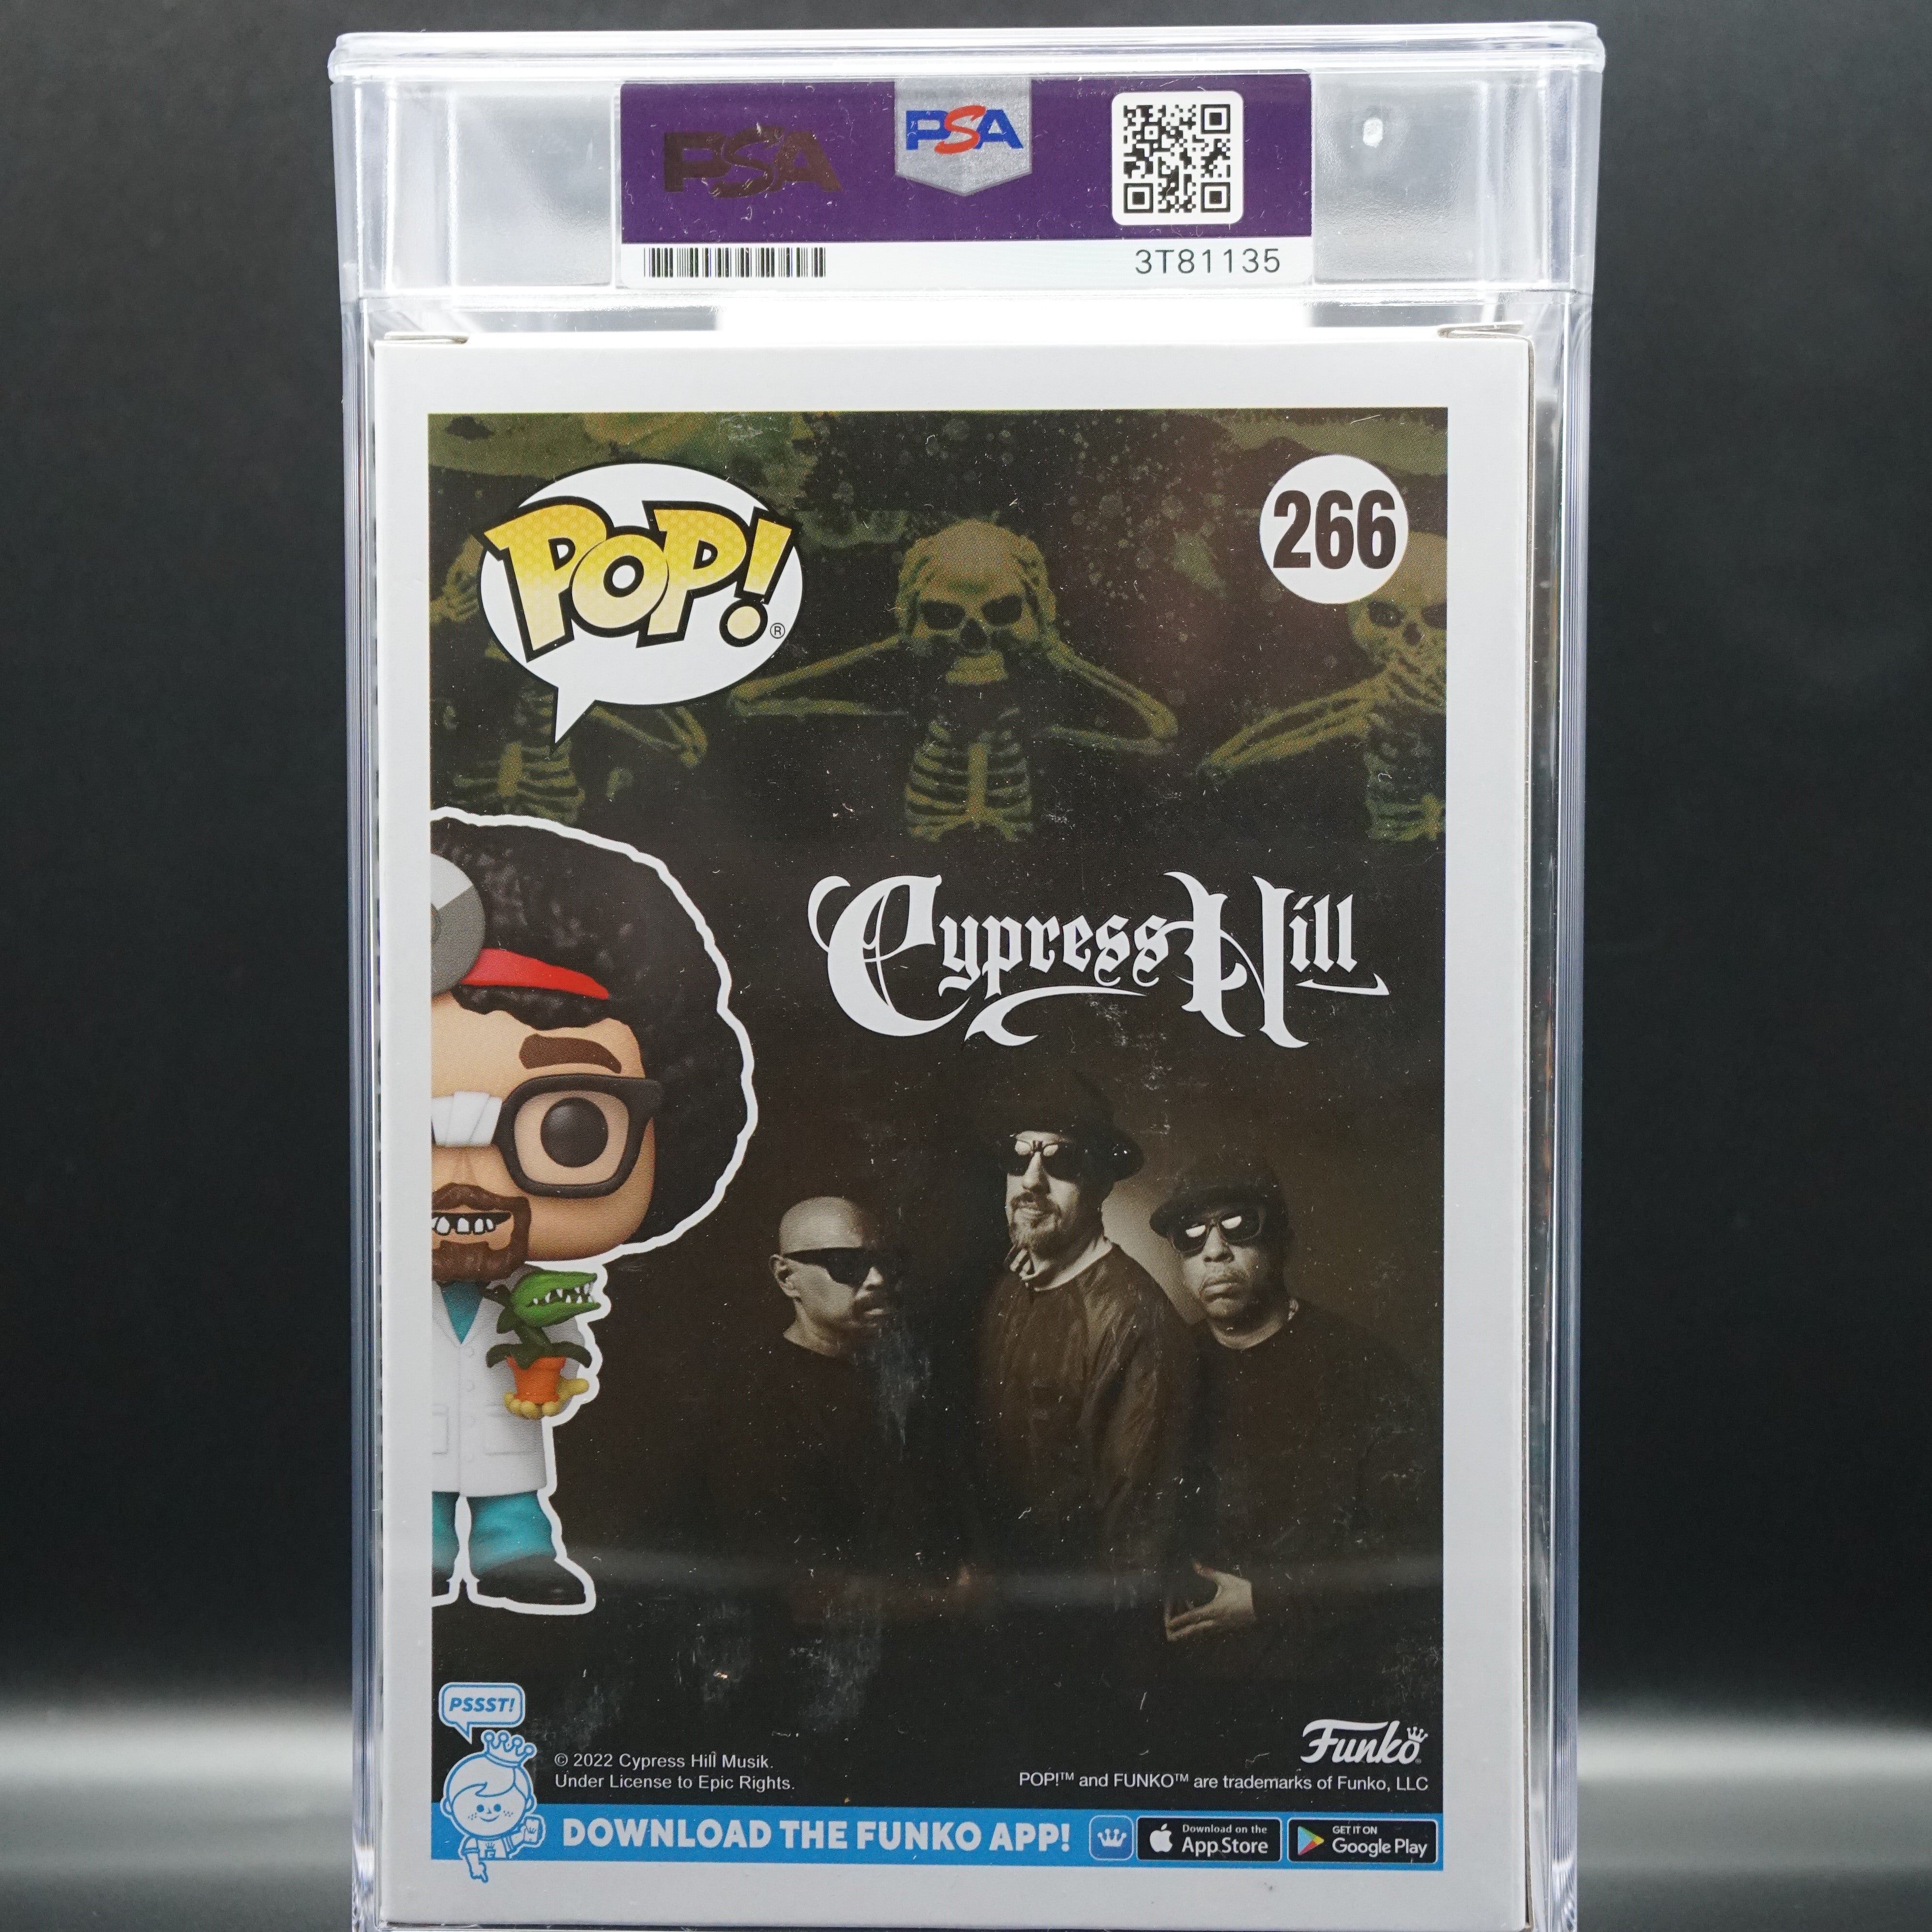 Cypress Hill Funko Pop  #266 Encapsulated B-Real as Dr. Green Thumb from Music Group inscripted "Get America stoned" or "AKA Dr. Green Thumb"  PSA COA  - Signed by B-Real